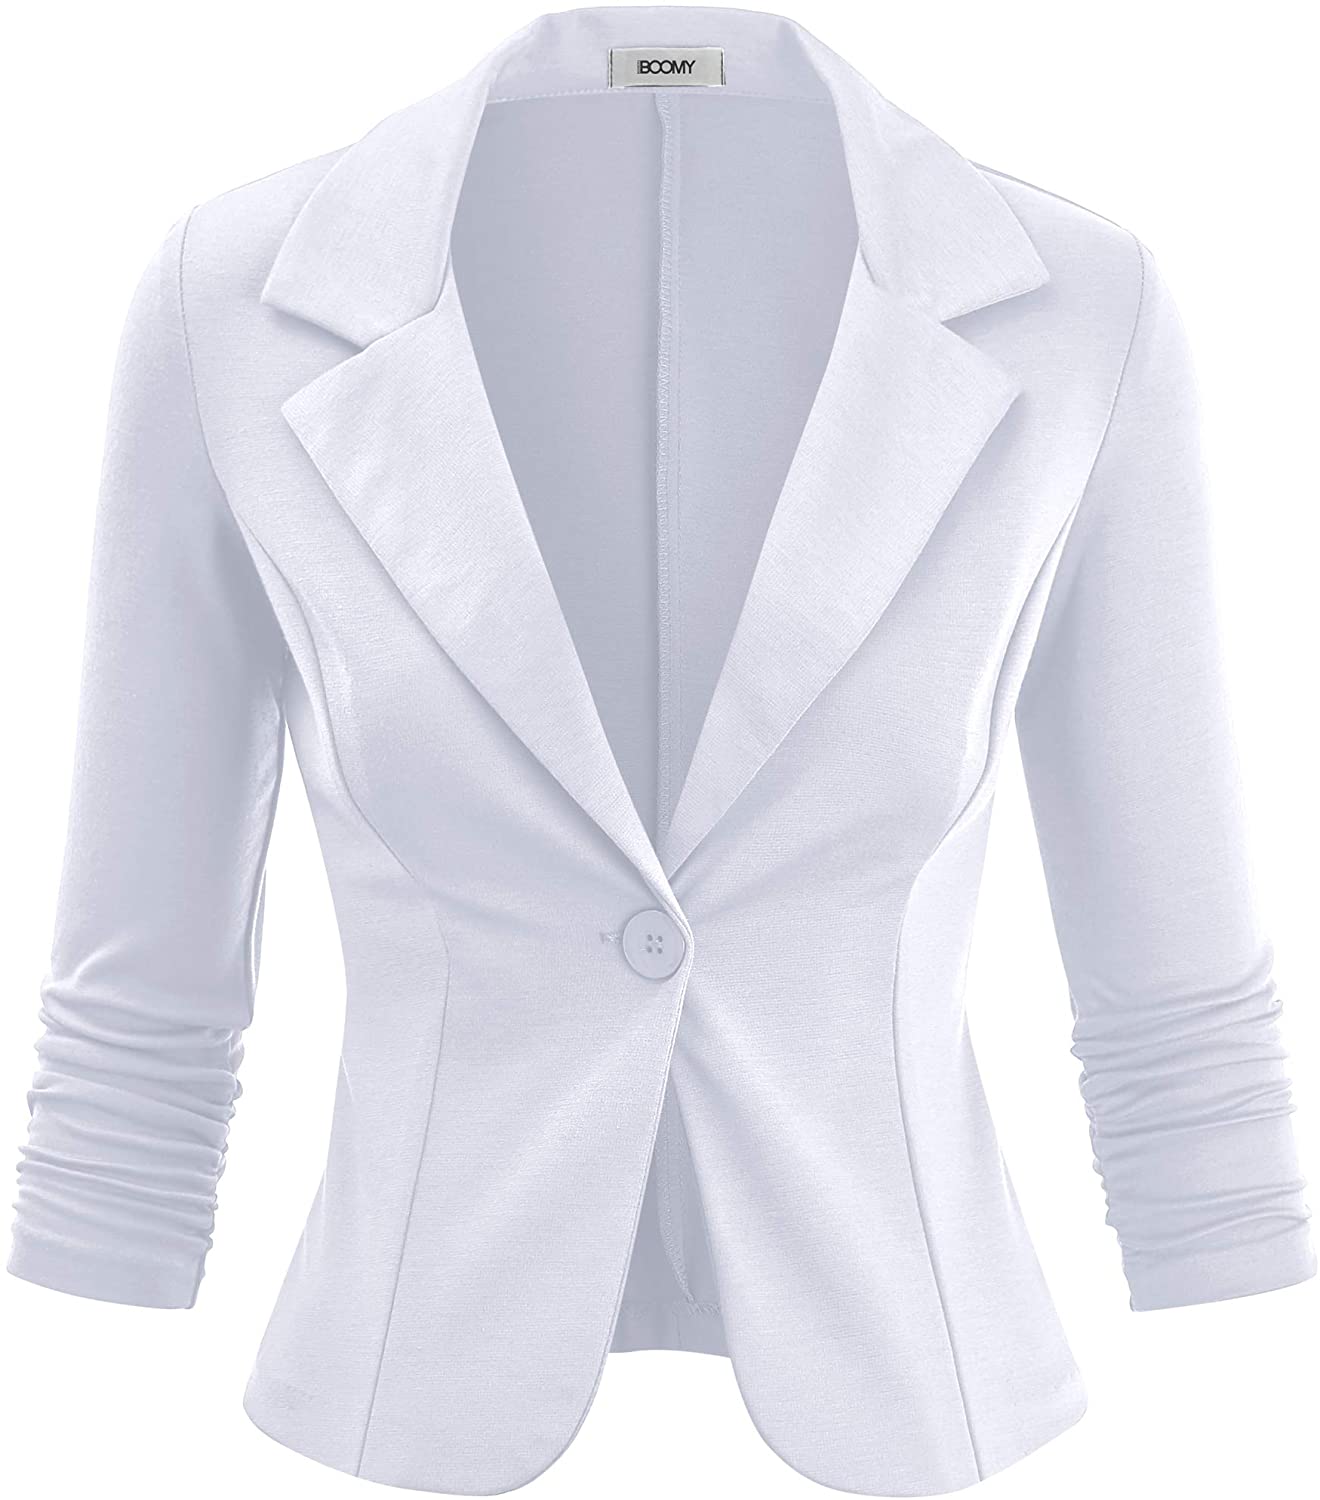 FASHION BOOMY Women's Casual Work Office Blazer Regular and Plus Sizes 3/4 Ruched Sleeve Knit Jacket